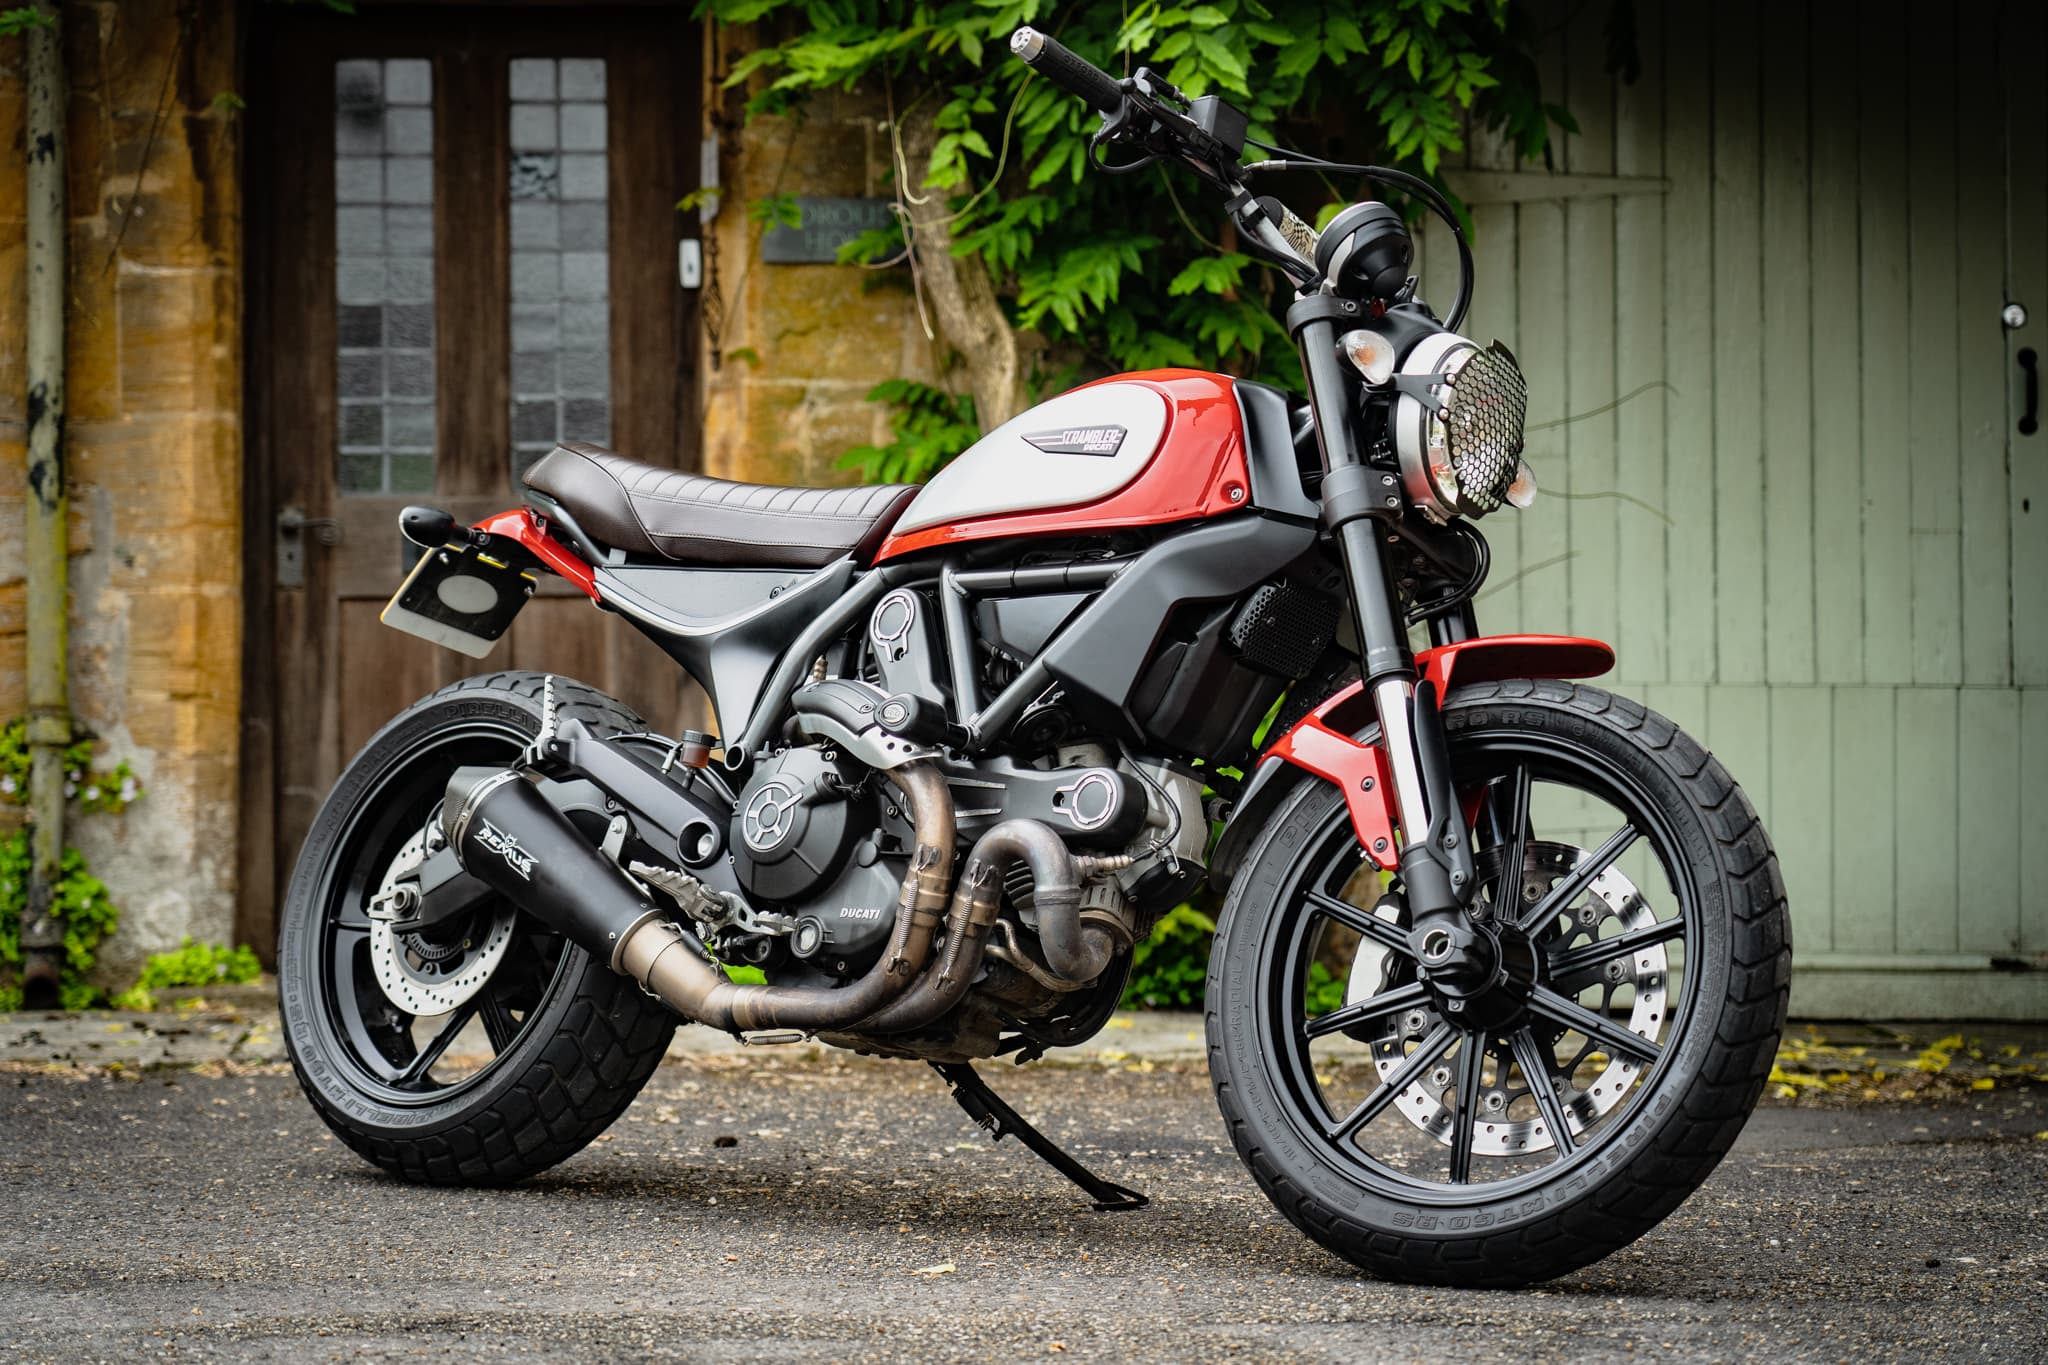 2015 Ducati Scrambler  – 803cc with R&G bits and Remus pipe- 15th June